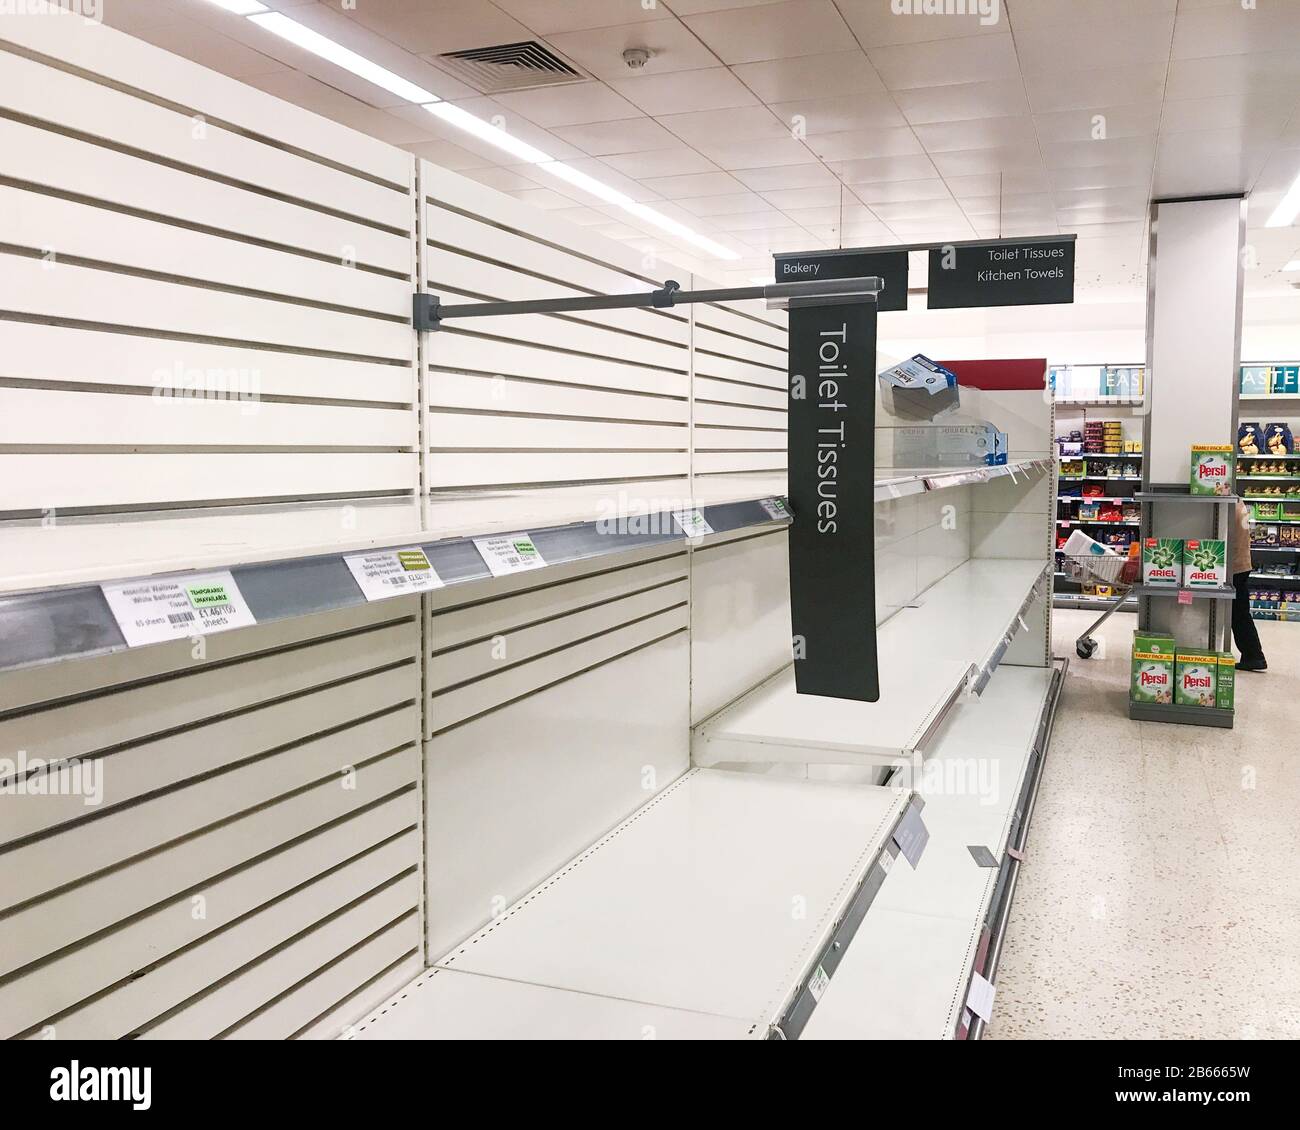 Panic-buying in UK stores due to COVID19 virus as shoppers clear shelves of essentials such as toilet paper.  March 8th 2020. Bracknell, England, UK Stock Photo